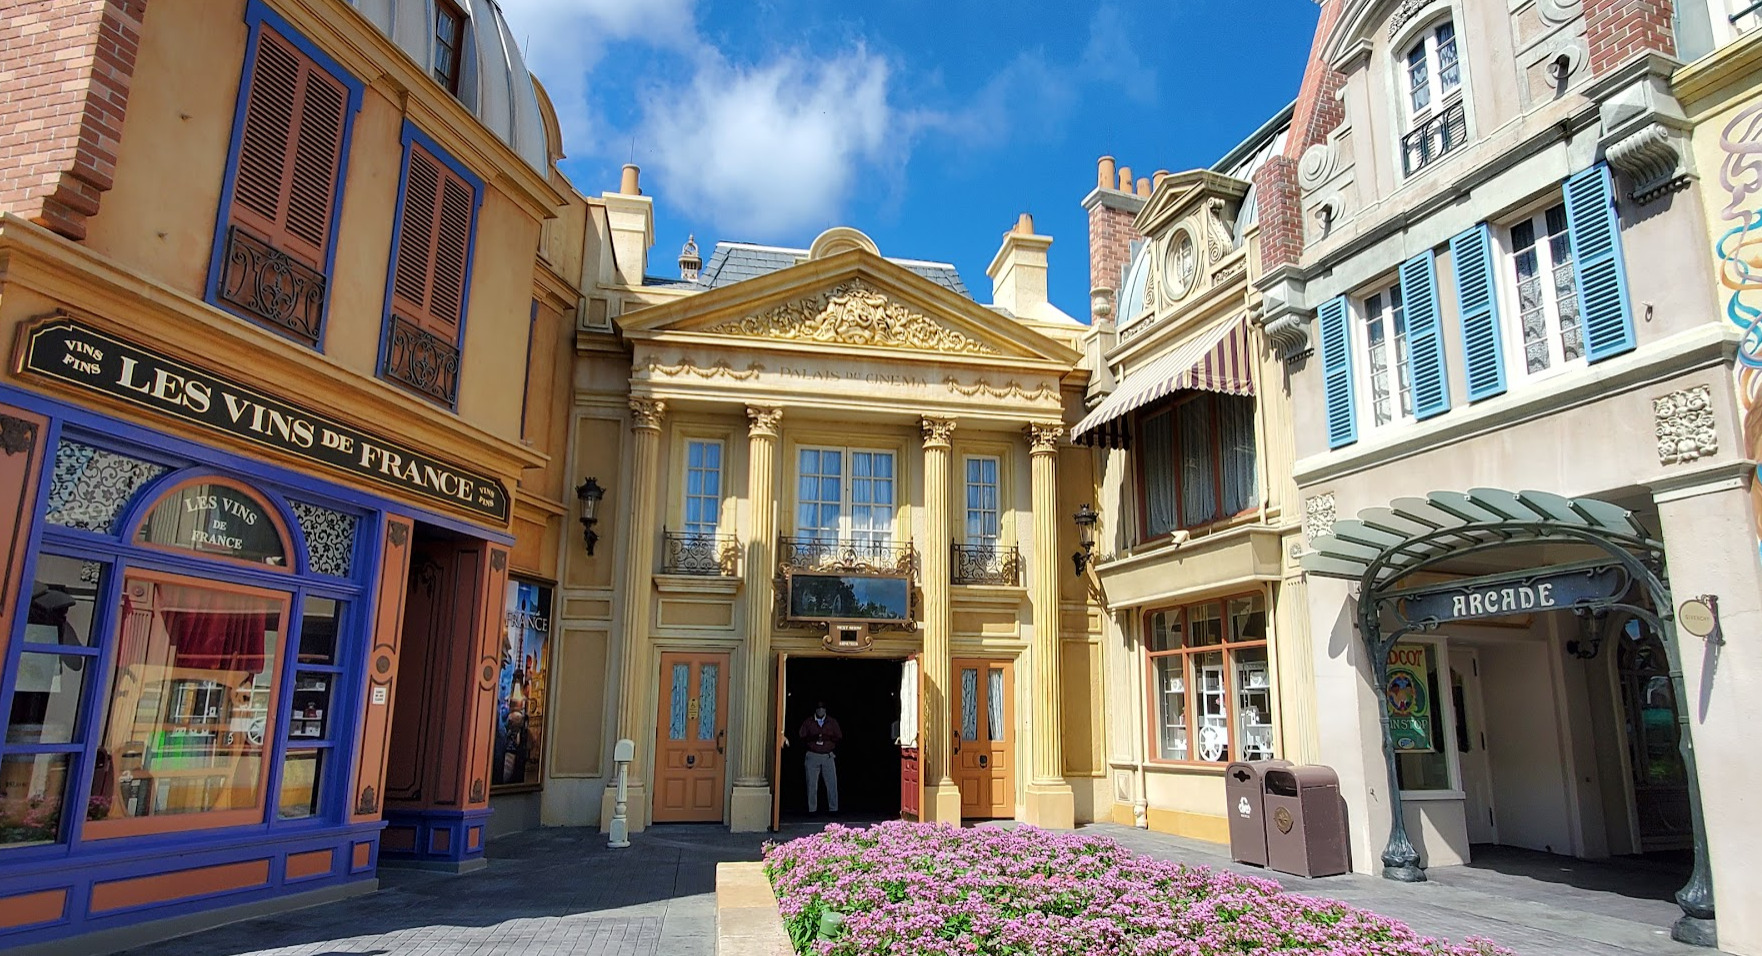 Impressions de France Returning to Normal Operating Hours in EPCOT